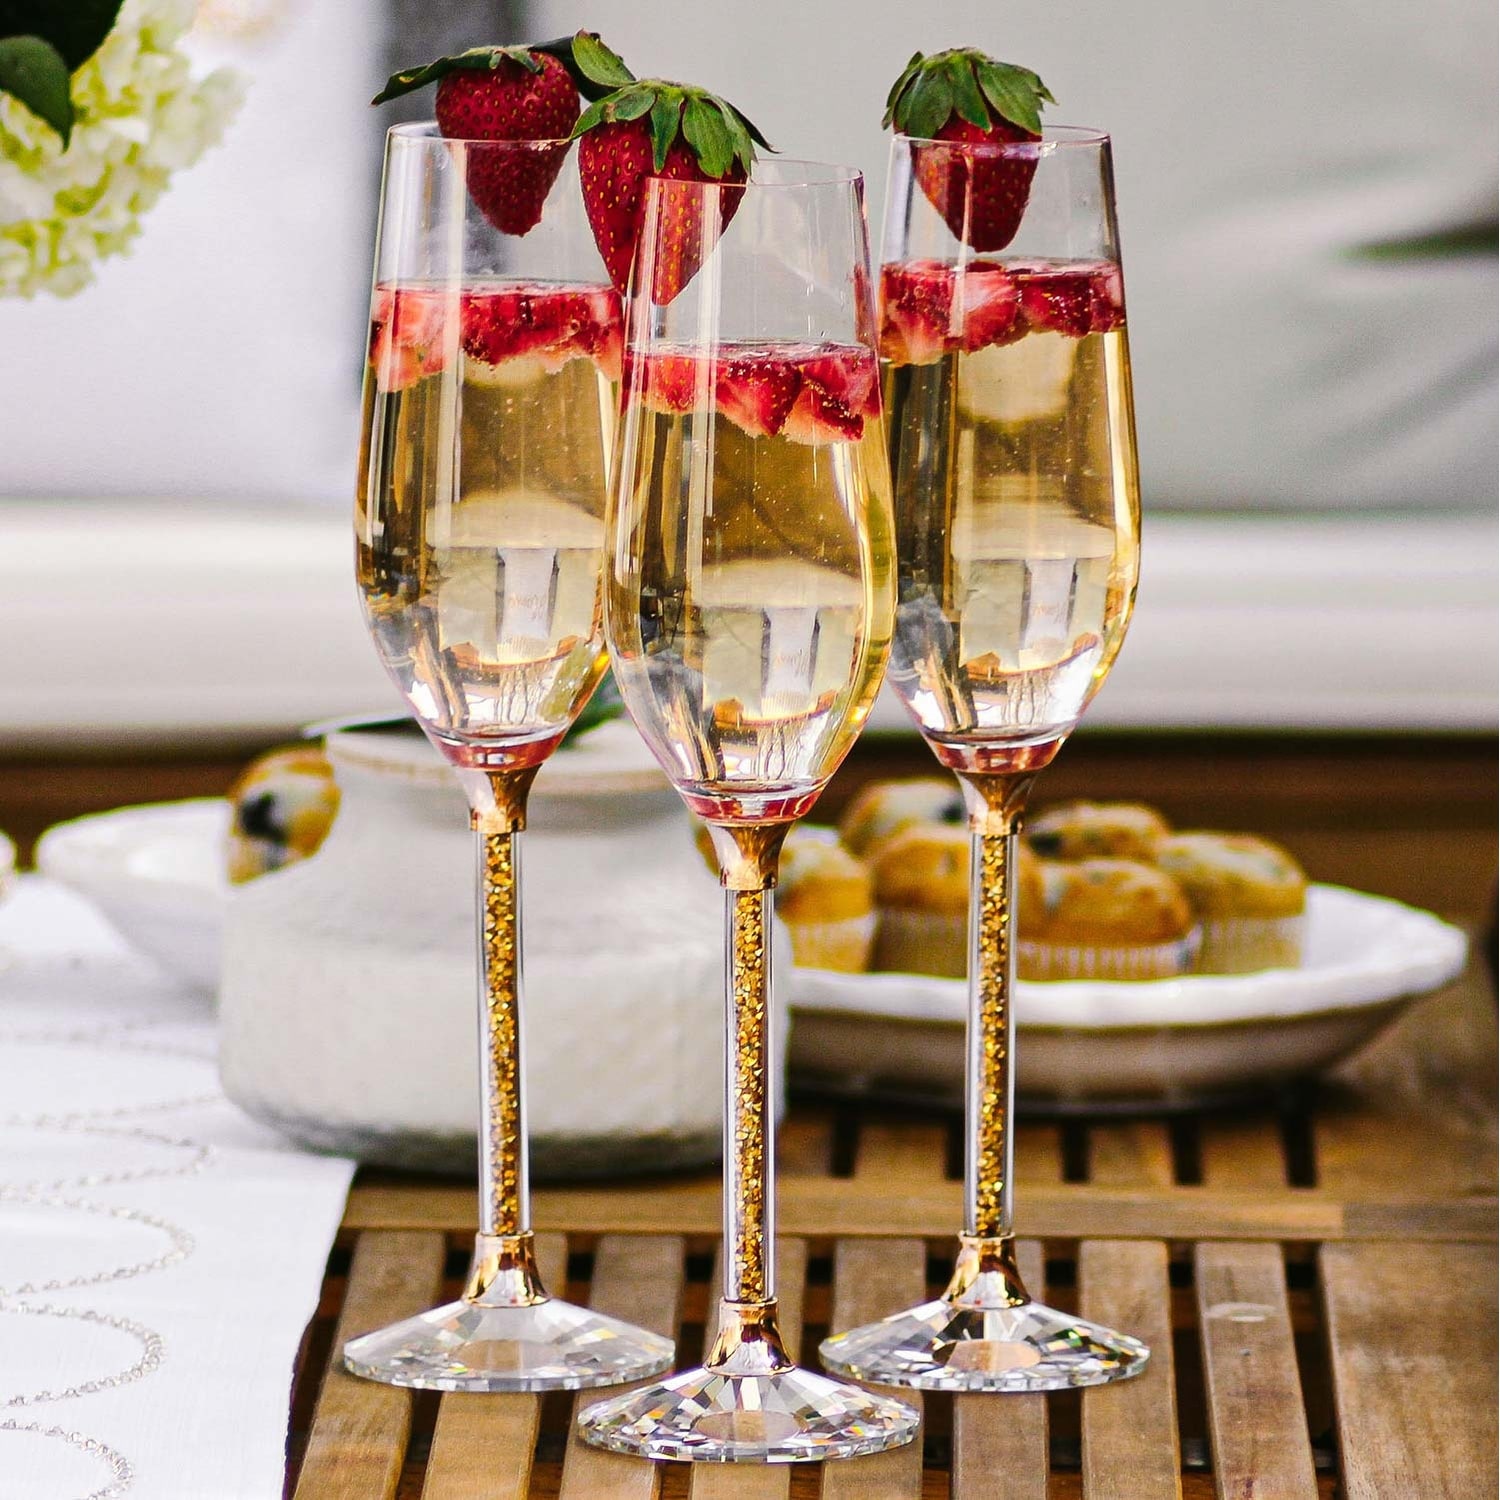 https://ak1.ostkcdn.com/images/products/is/images/direct/bdd5fb01cd73cffe05aae6c50a6bef5dbd1b08c1/Sparkles-Home-Rhinestone-Crystal-Filled-Stem-Toasting-Flutes.jpg